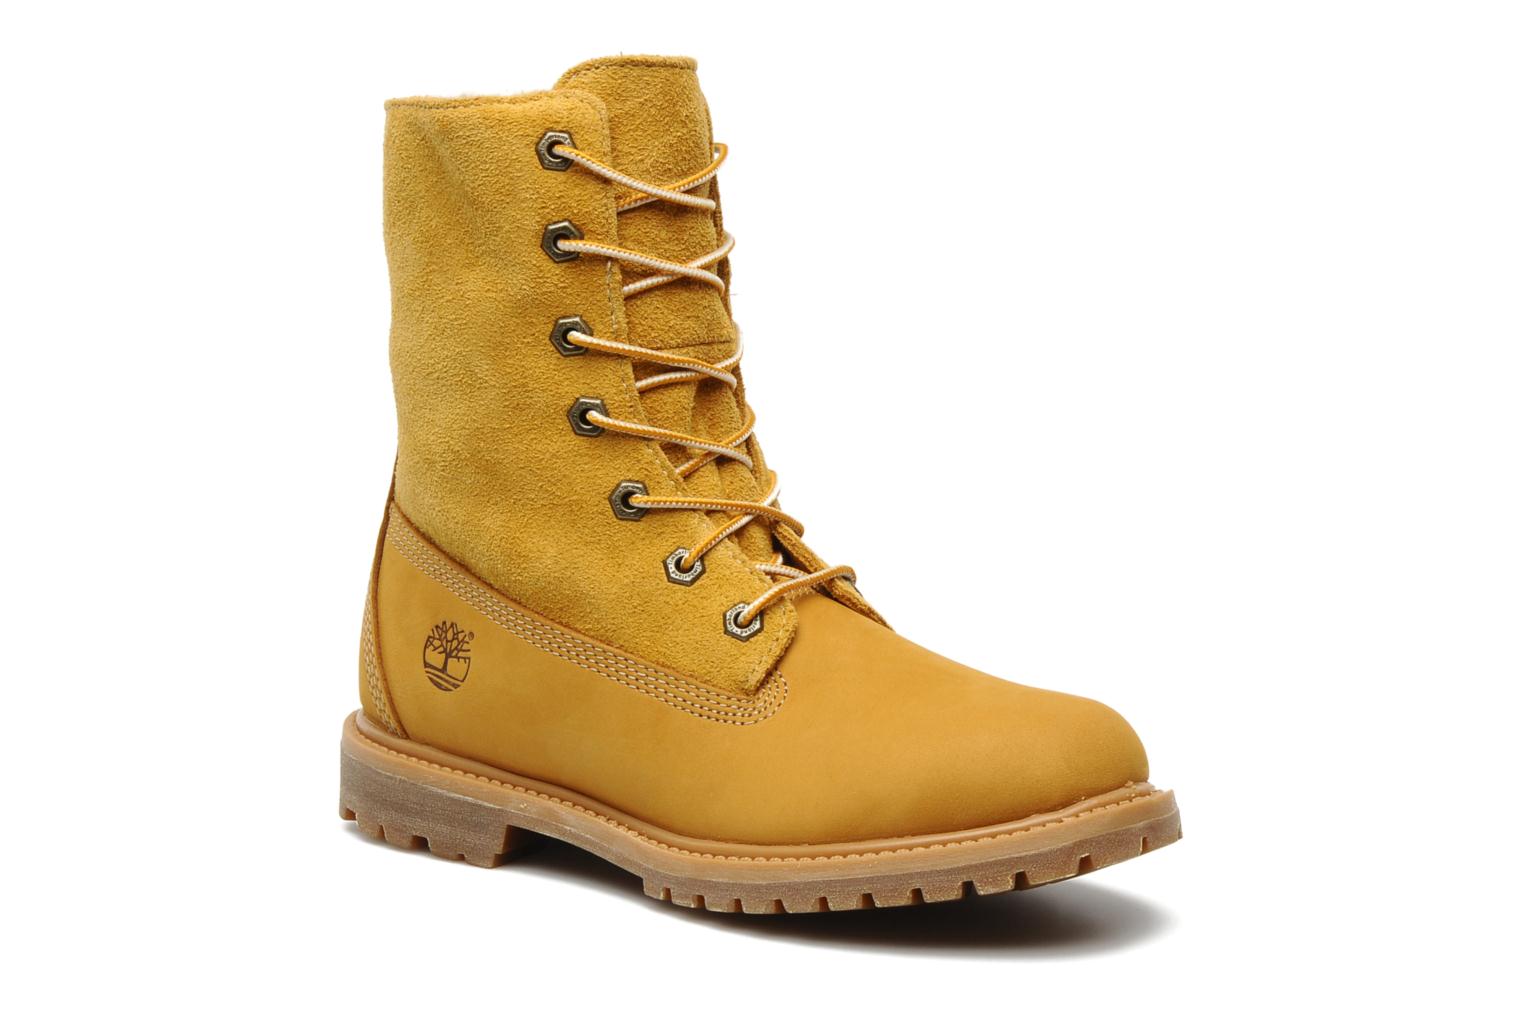 Foto Boots y Botines Timberland Authentics Teddy Fleece Fold Down Mujer foto 22187